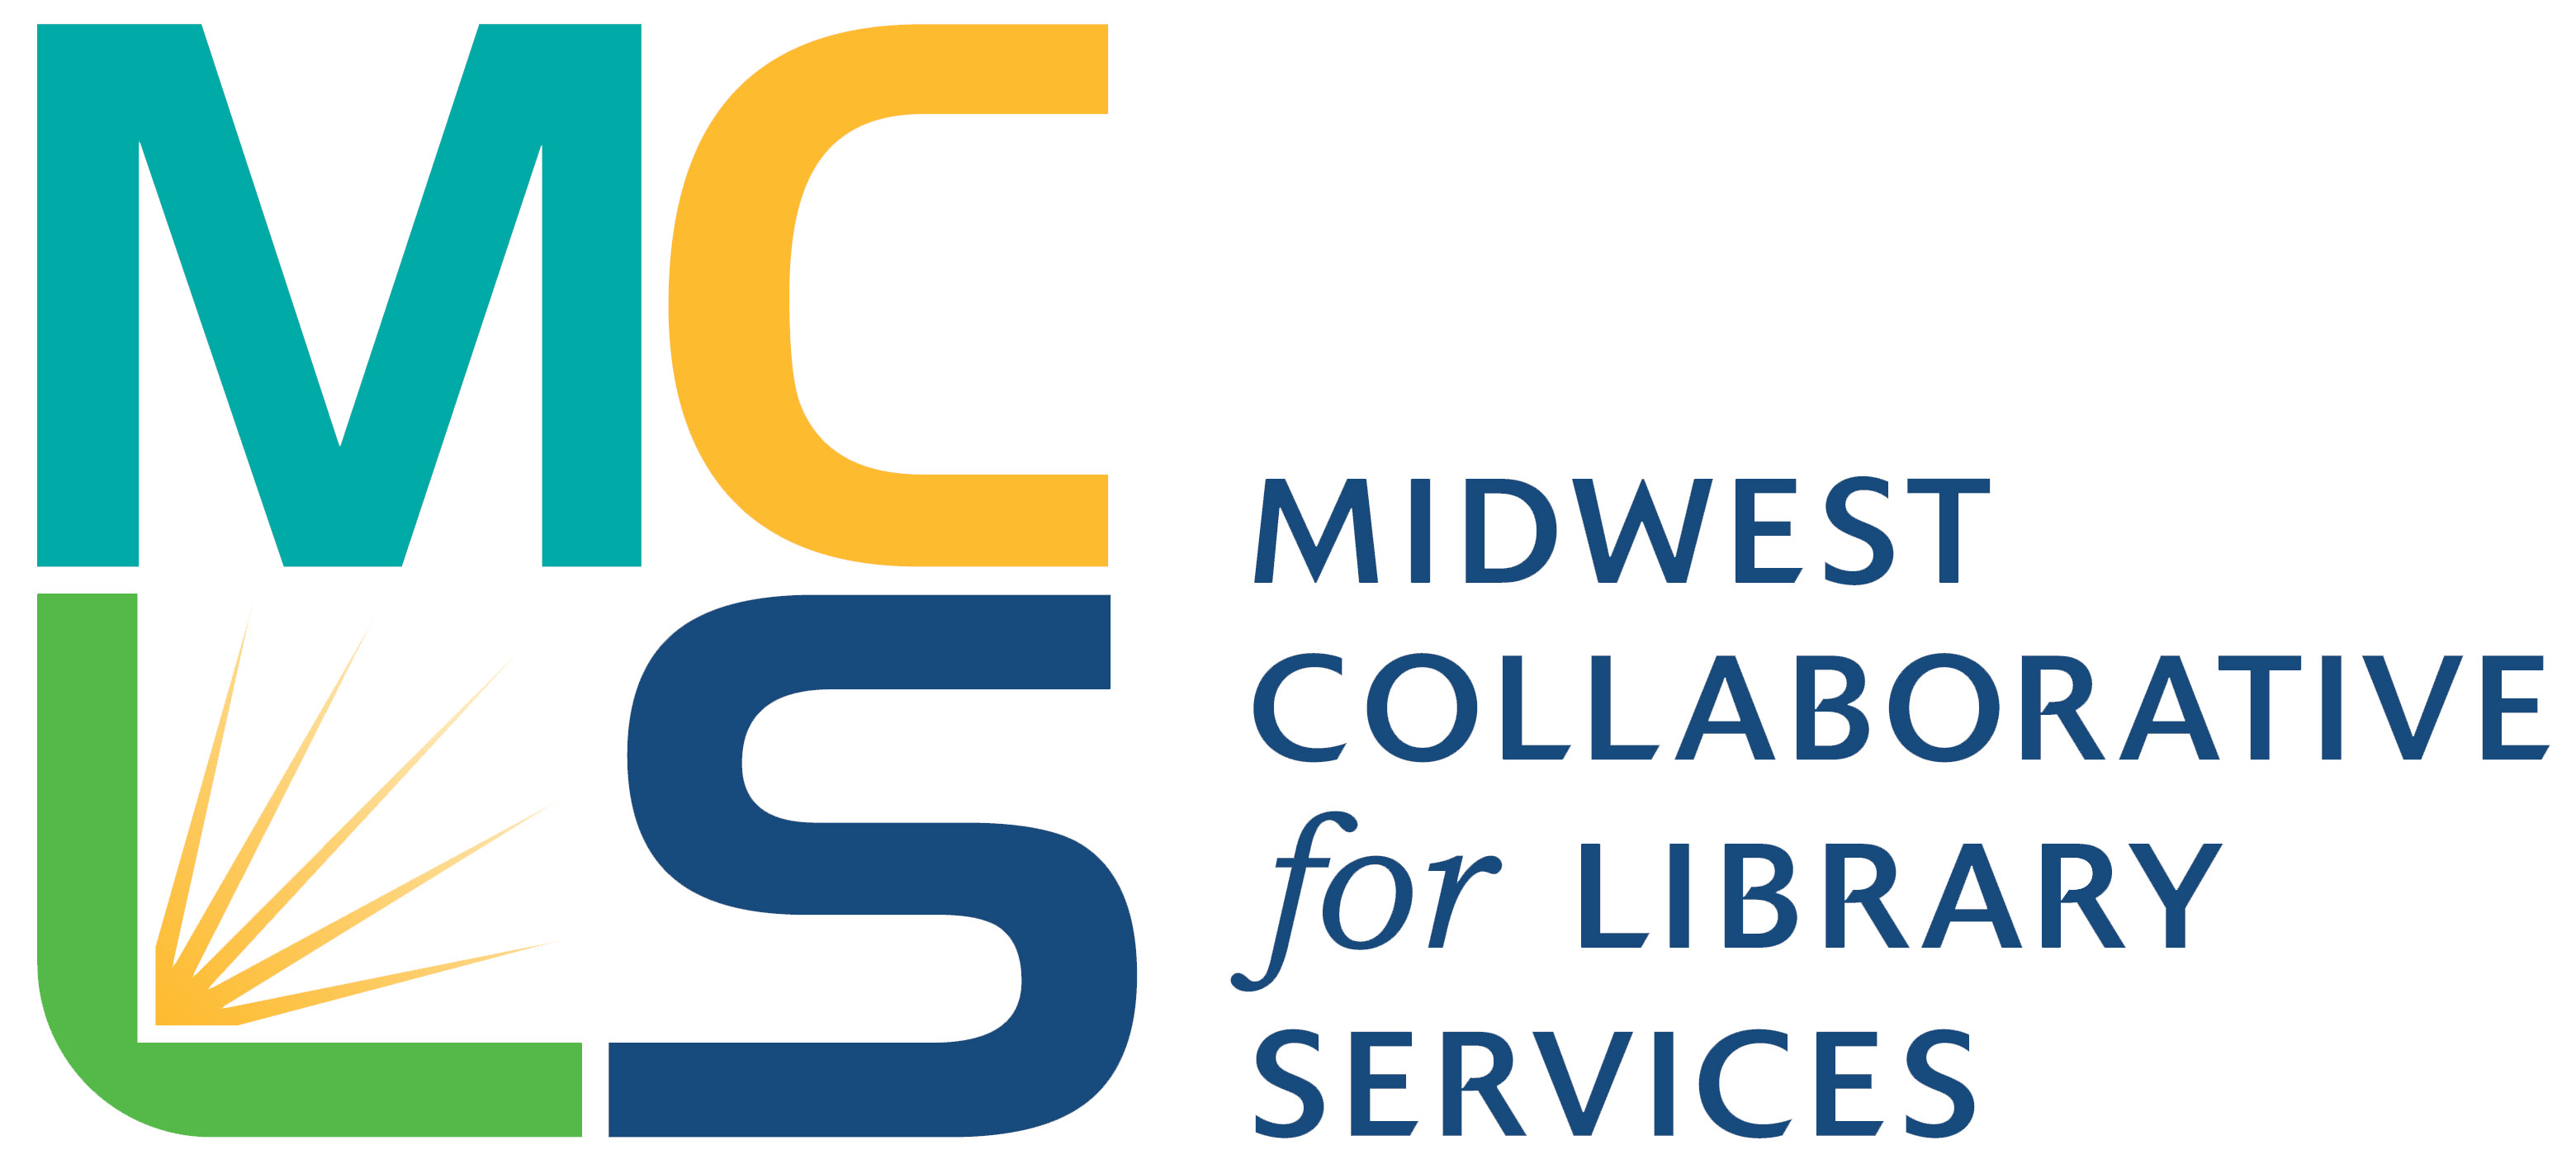 Midwest Collaborative for Library Services